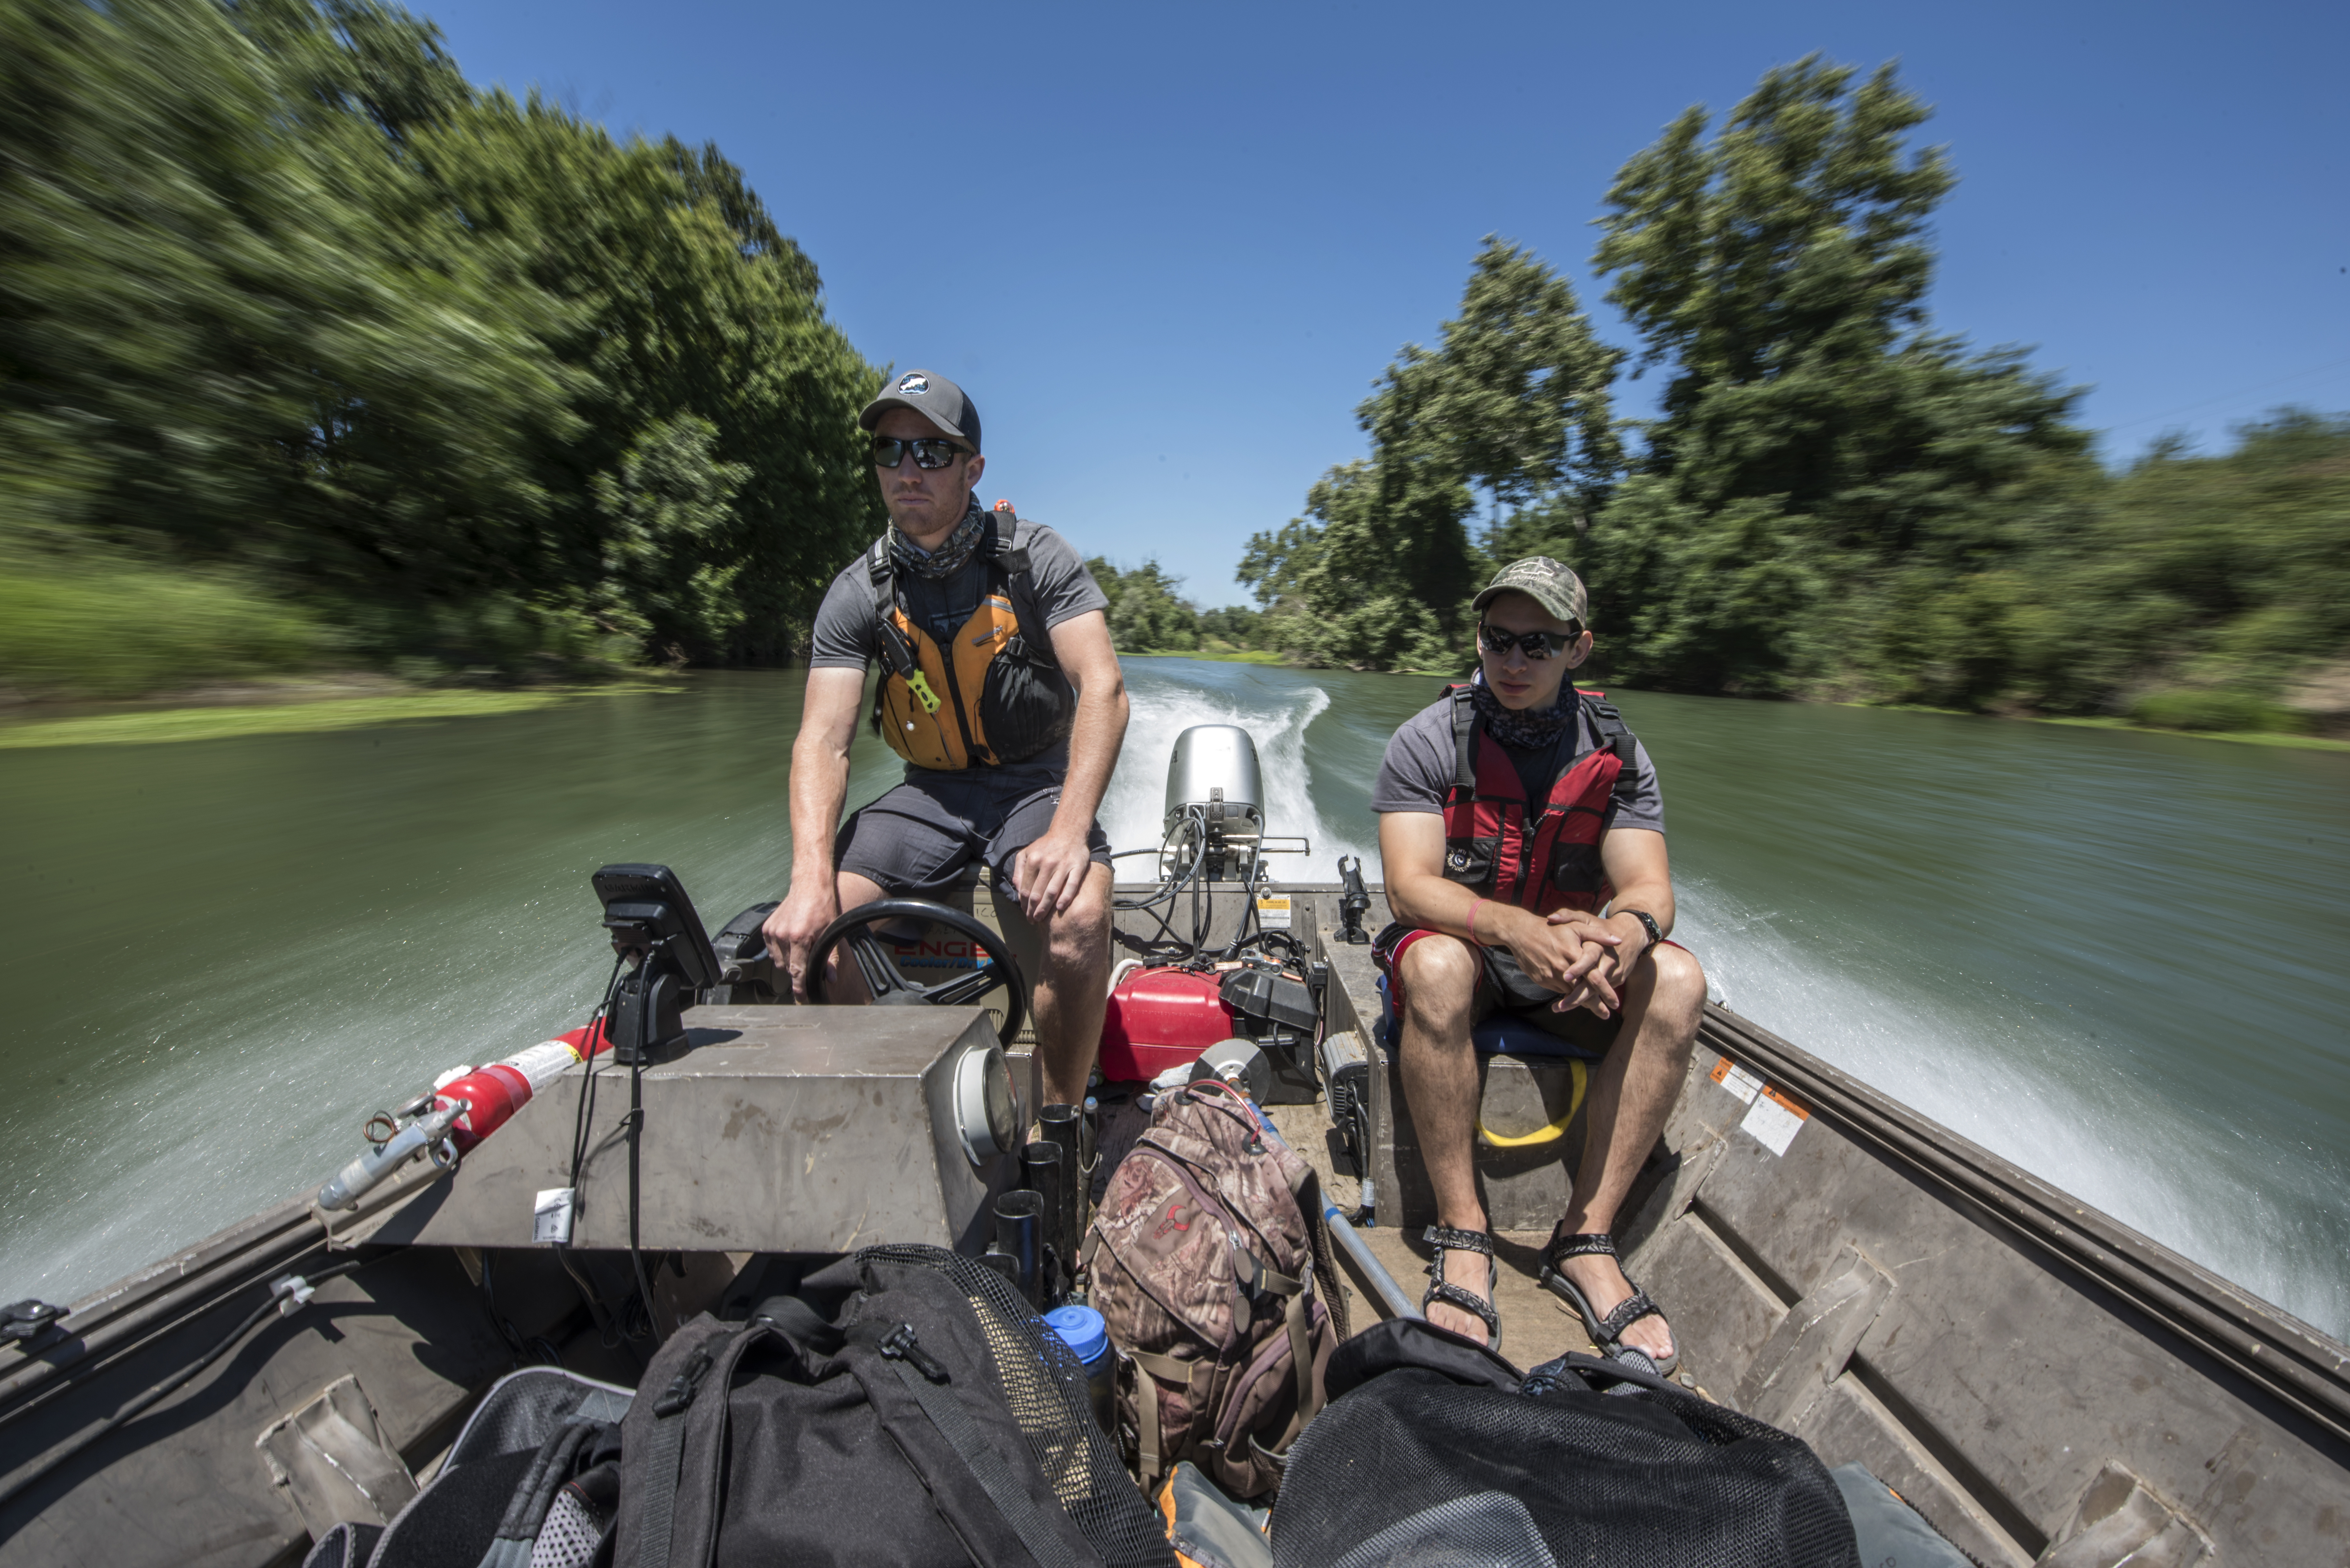 Graduate student Dylan Stompe (left) drives a boat along with Carlos Estrada (right) as students count salmon as part of a Summer Undergraduate Research Program (UGR) involved in the Chico STEM Connections Collaborative (CSC2) program on the Sacramento River on Wednesday, July 5, 2017 in Chico, Calif. (Jason Halley/University Photographer)